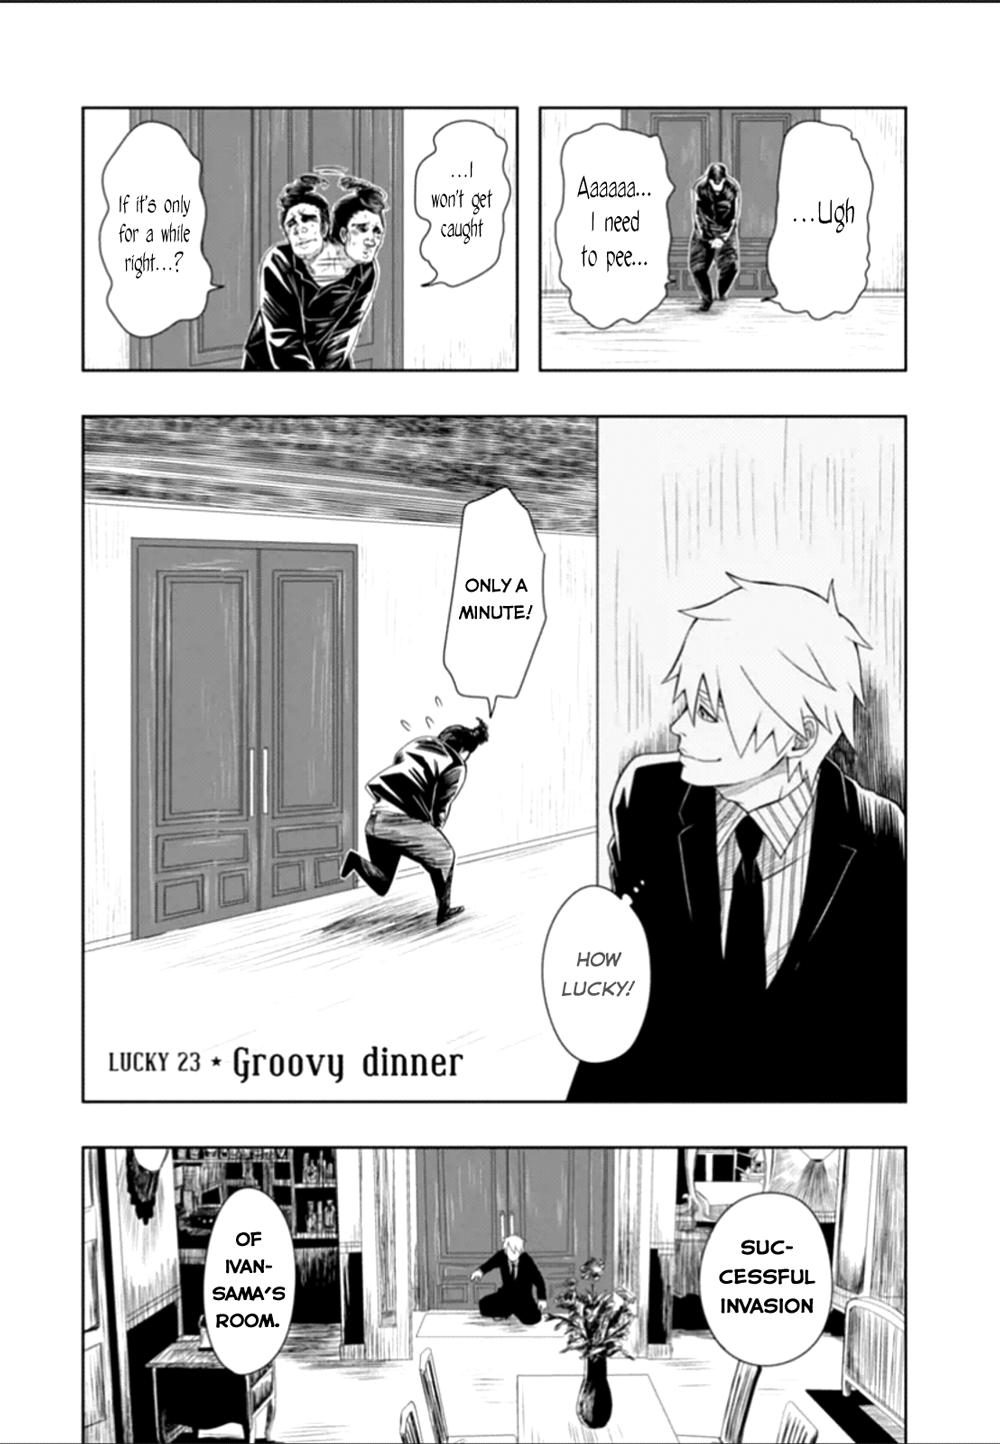 Lucky Dog 1 Blast Vol.5 Chapter 23: Groovy Dinner - Picture 2